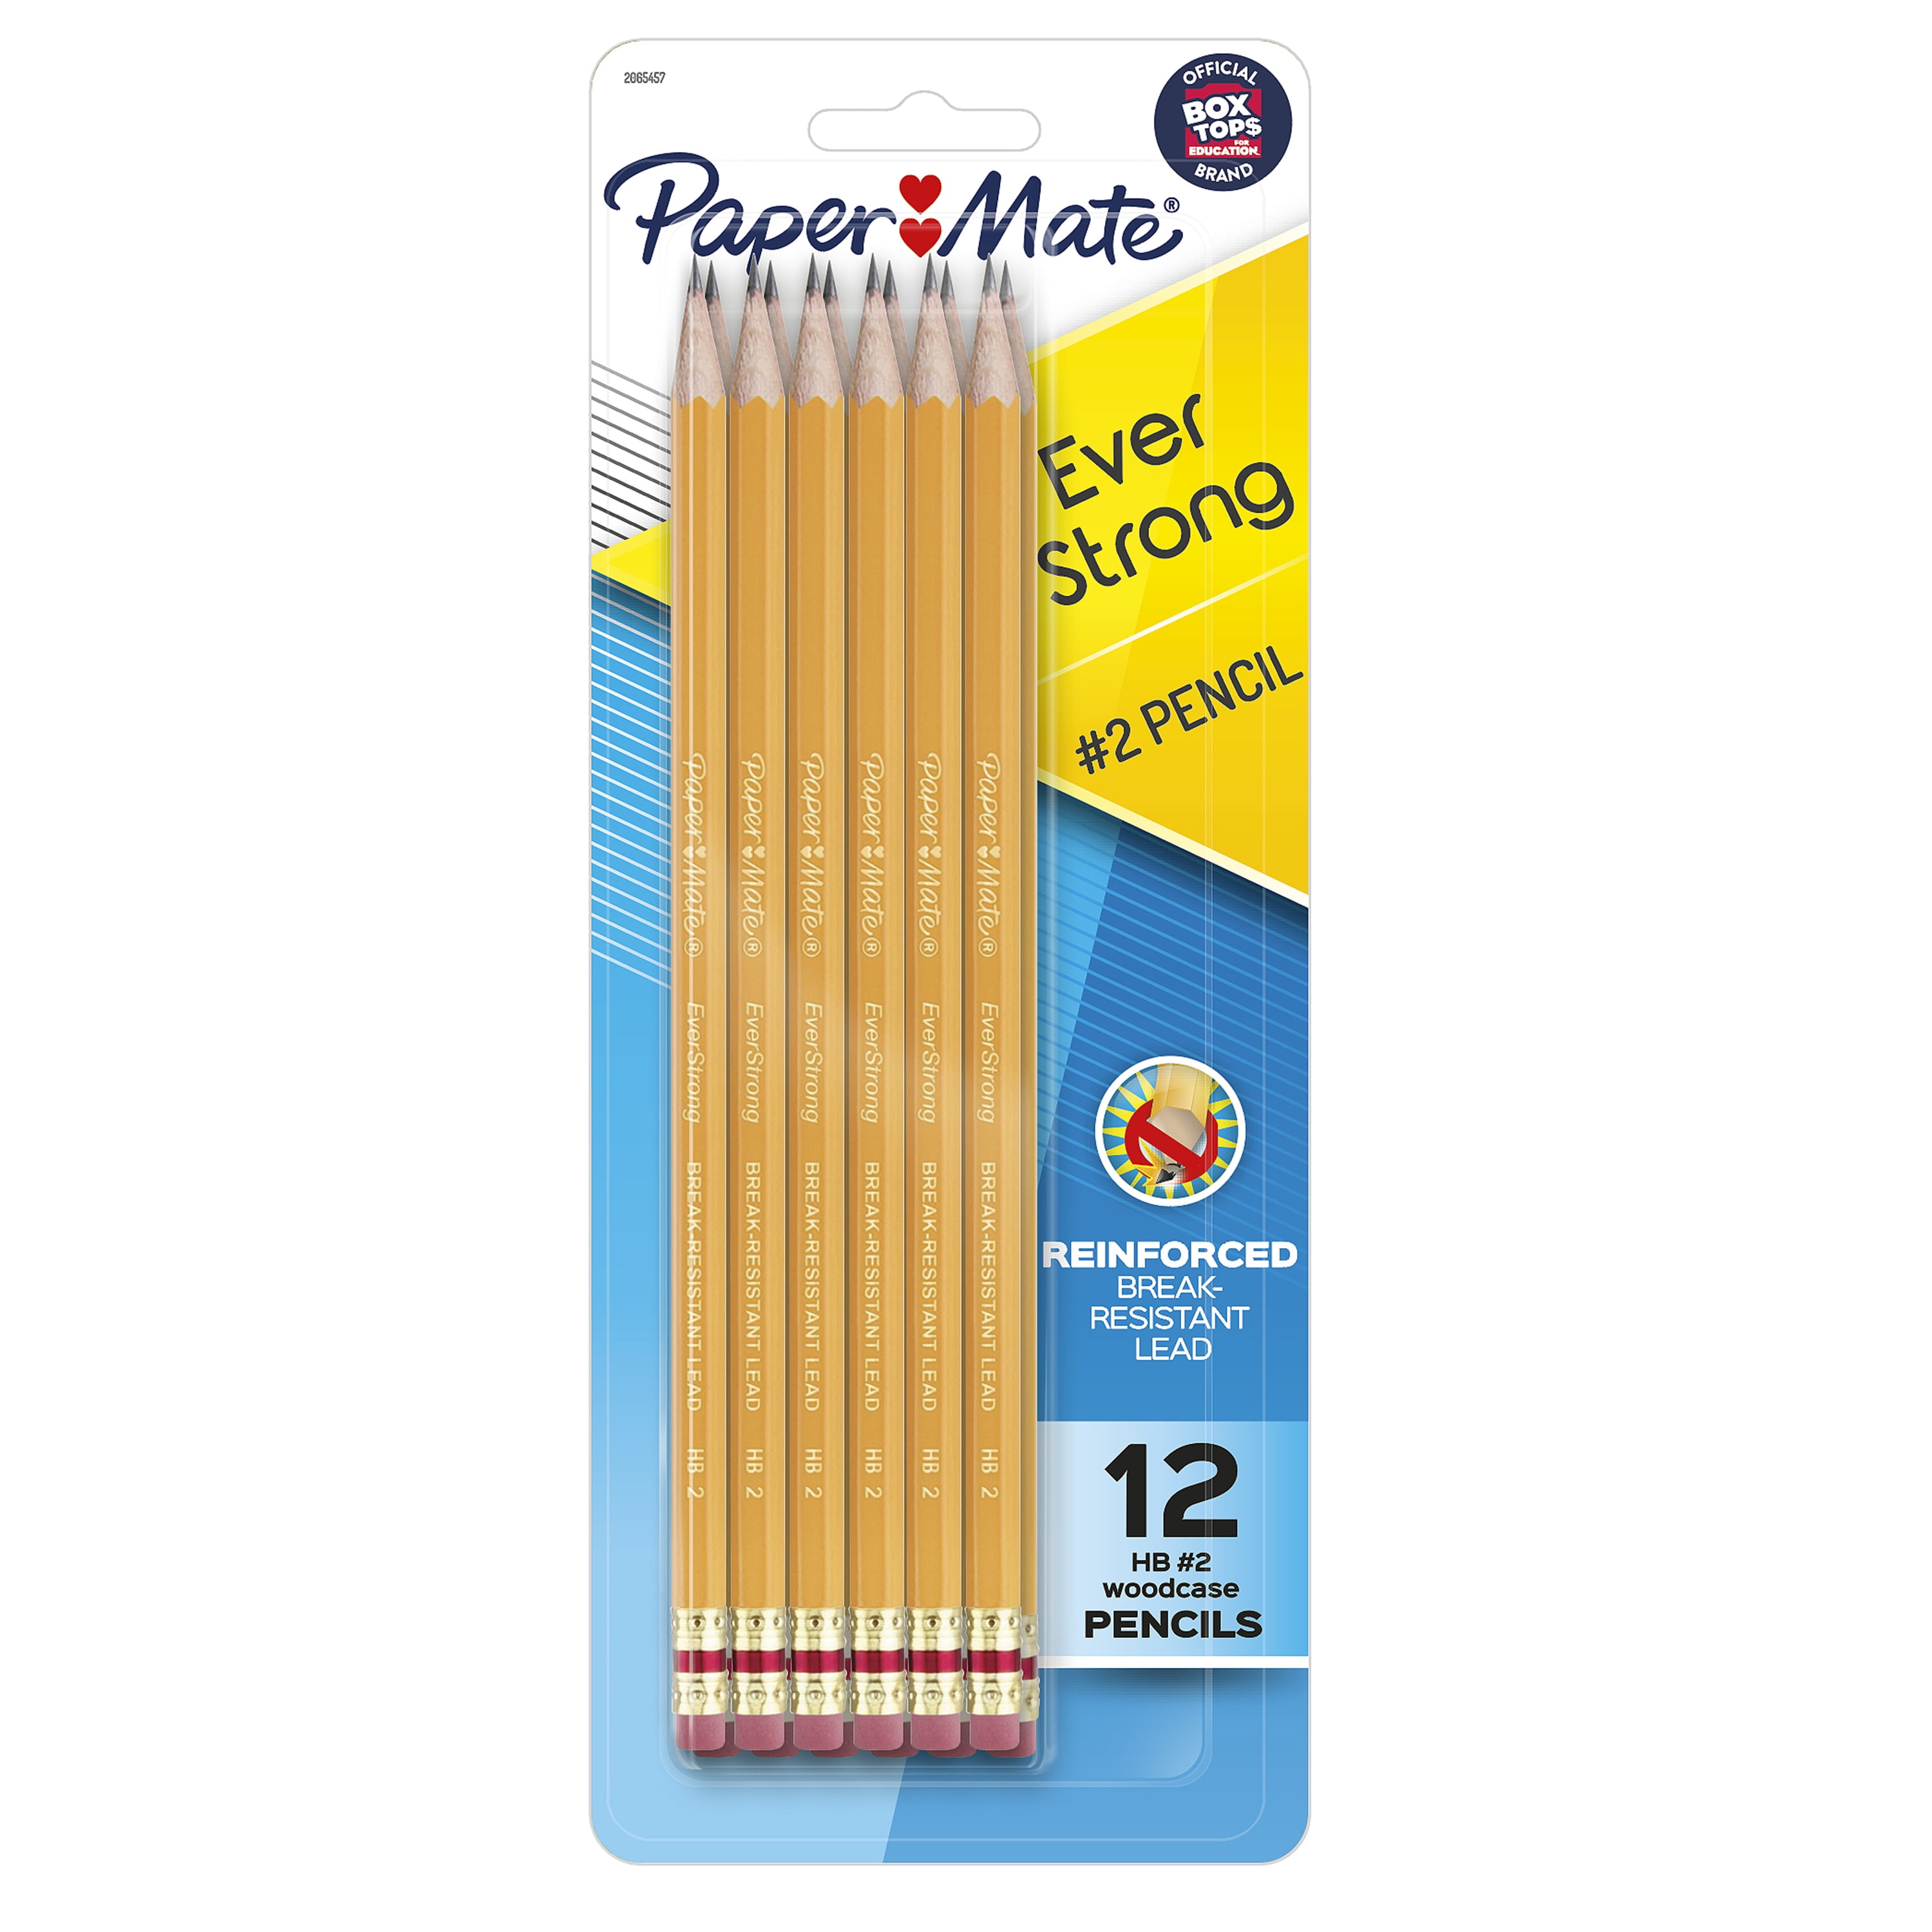 Papermate®Crayon Canadiana Woodcase HB#2, Toujours fort, paquet de 12  crayons, 584748